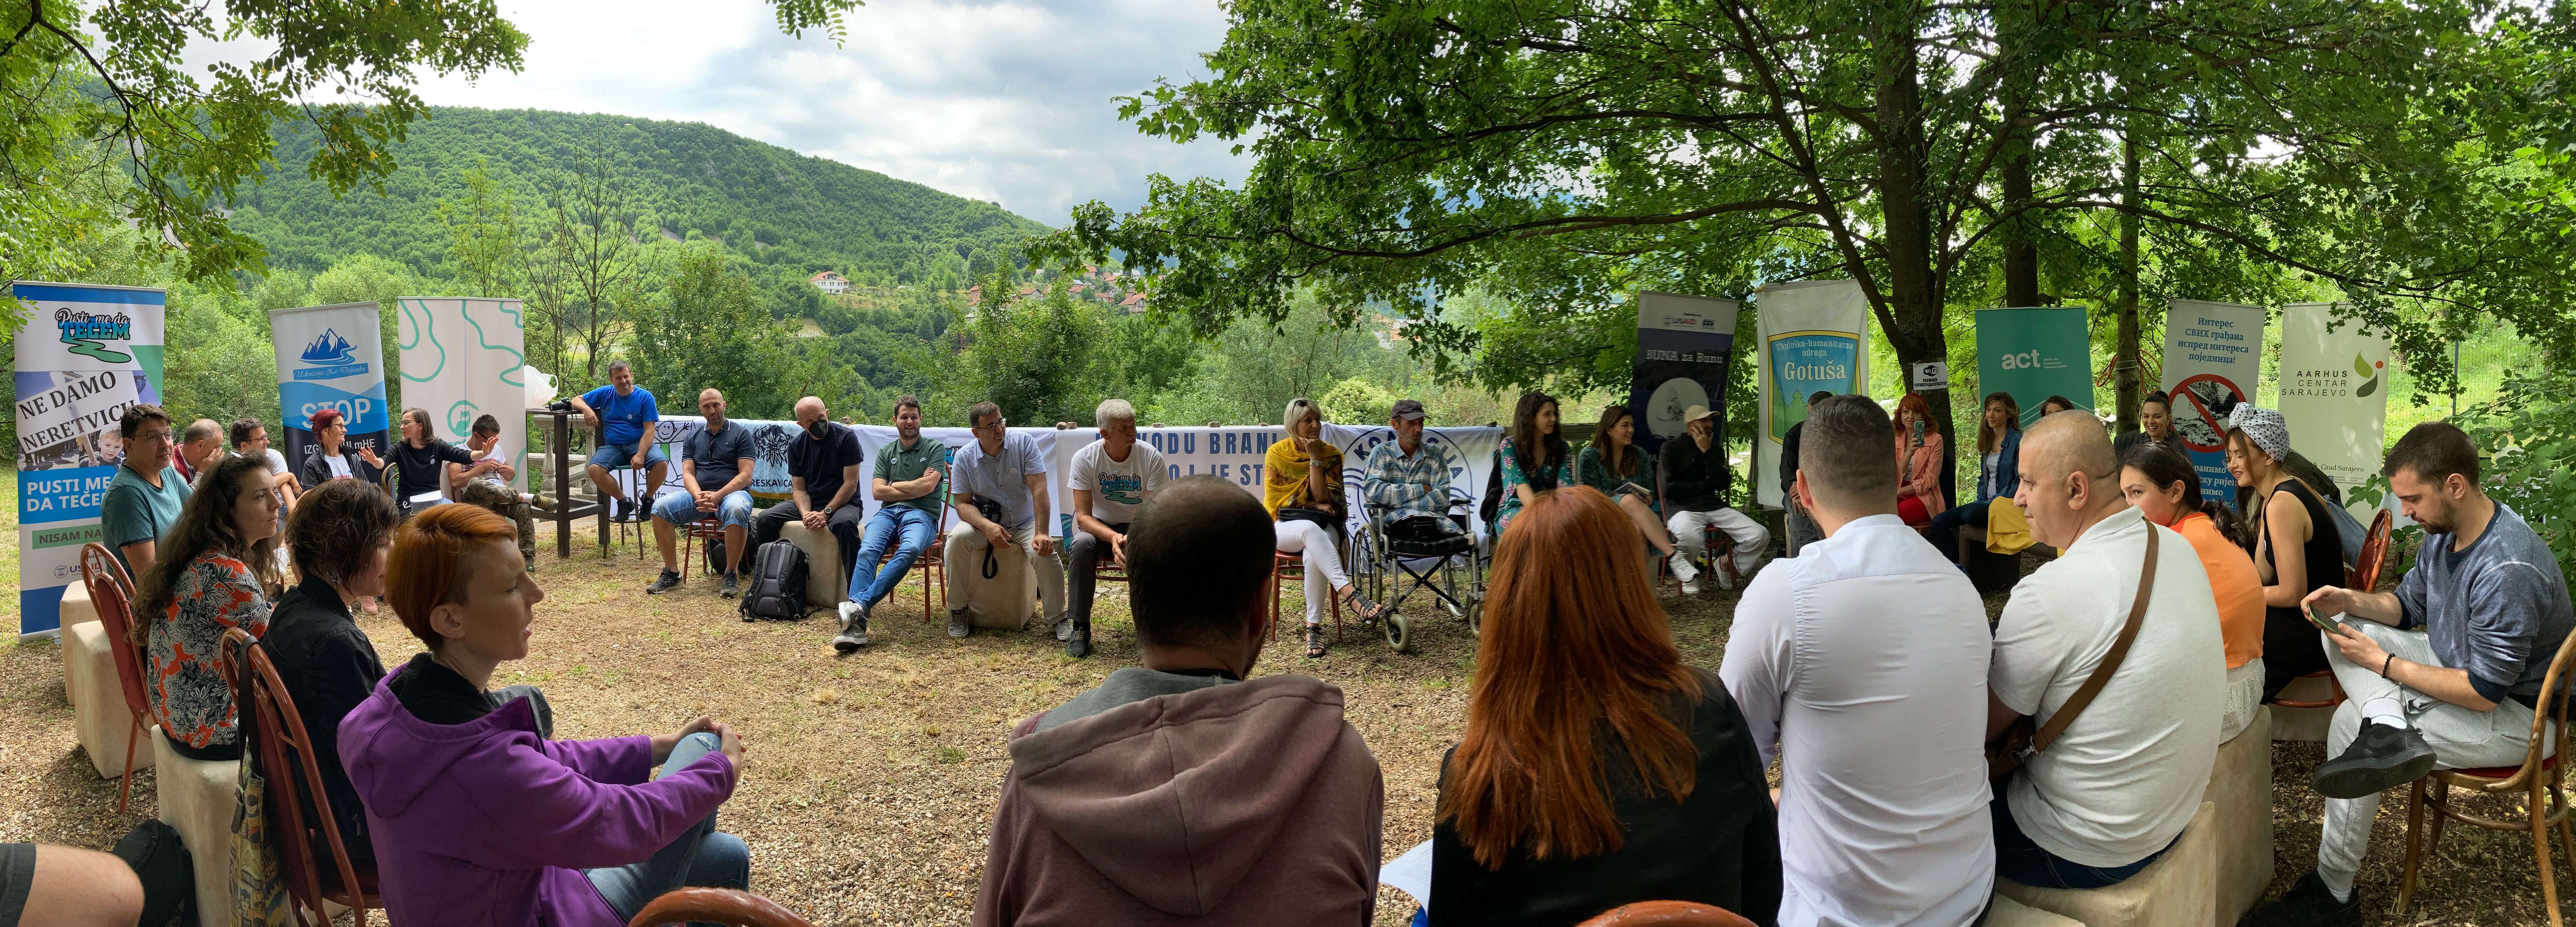 On Saturday, activists from various Balkan countries met in Sarajevo to initiate a new movement. Many of them have been fighting against the construction of hydropower plants for years, for example on the Neretvica (BIH) or Stara Planina (Serbia), in Kosovo or in Montenegro. © Ulrich Eichelmann